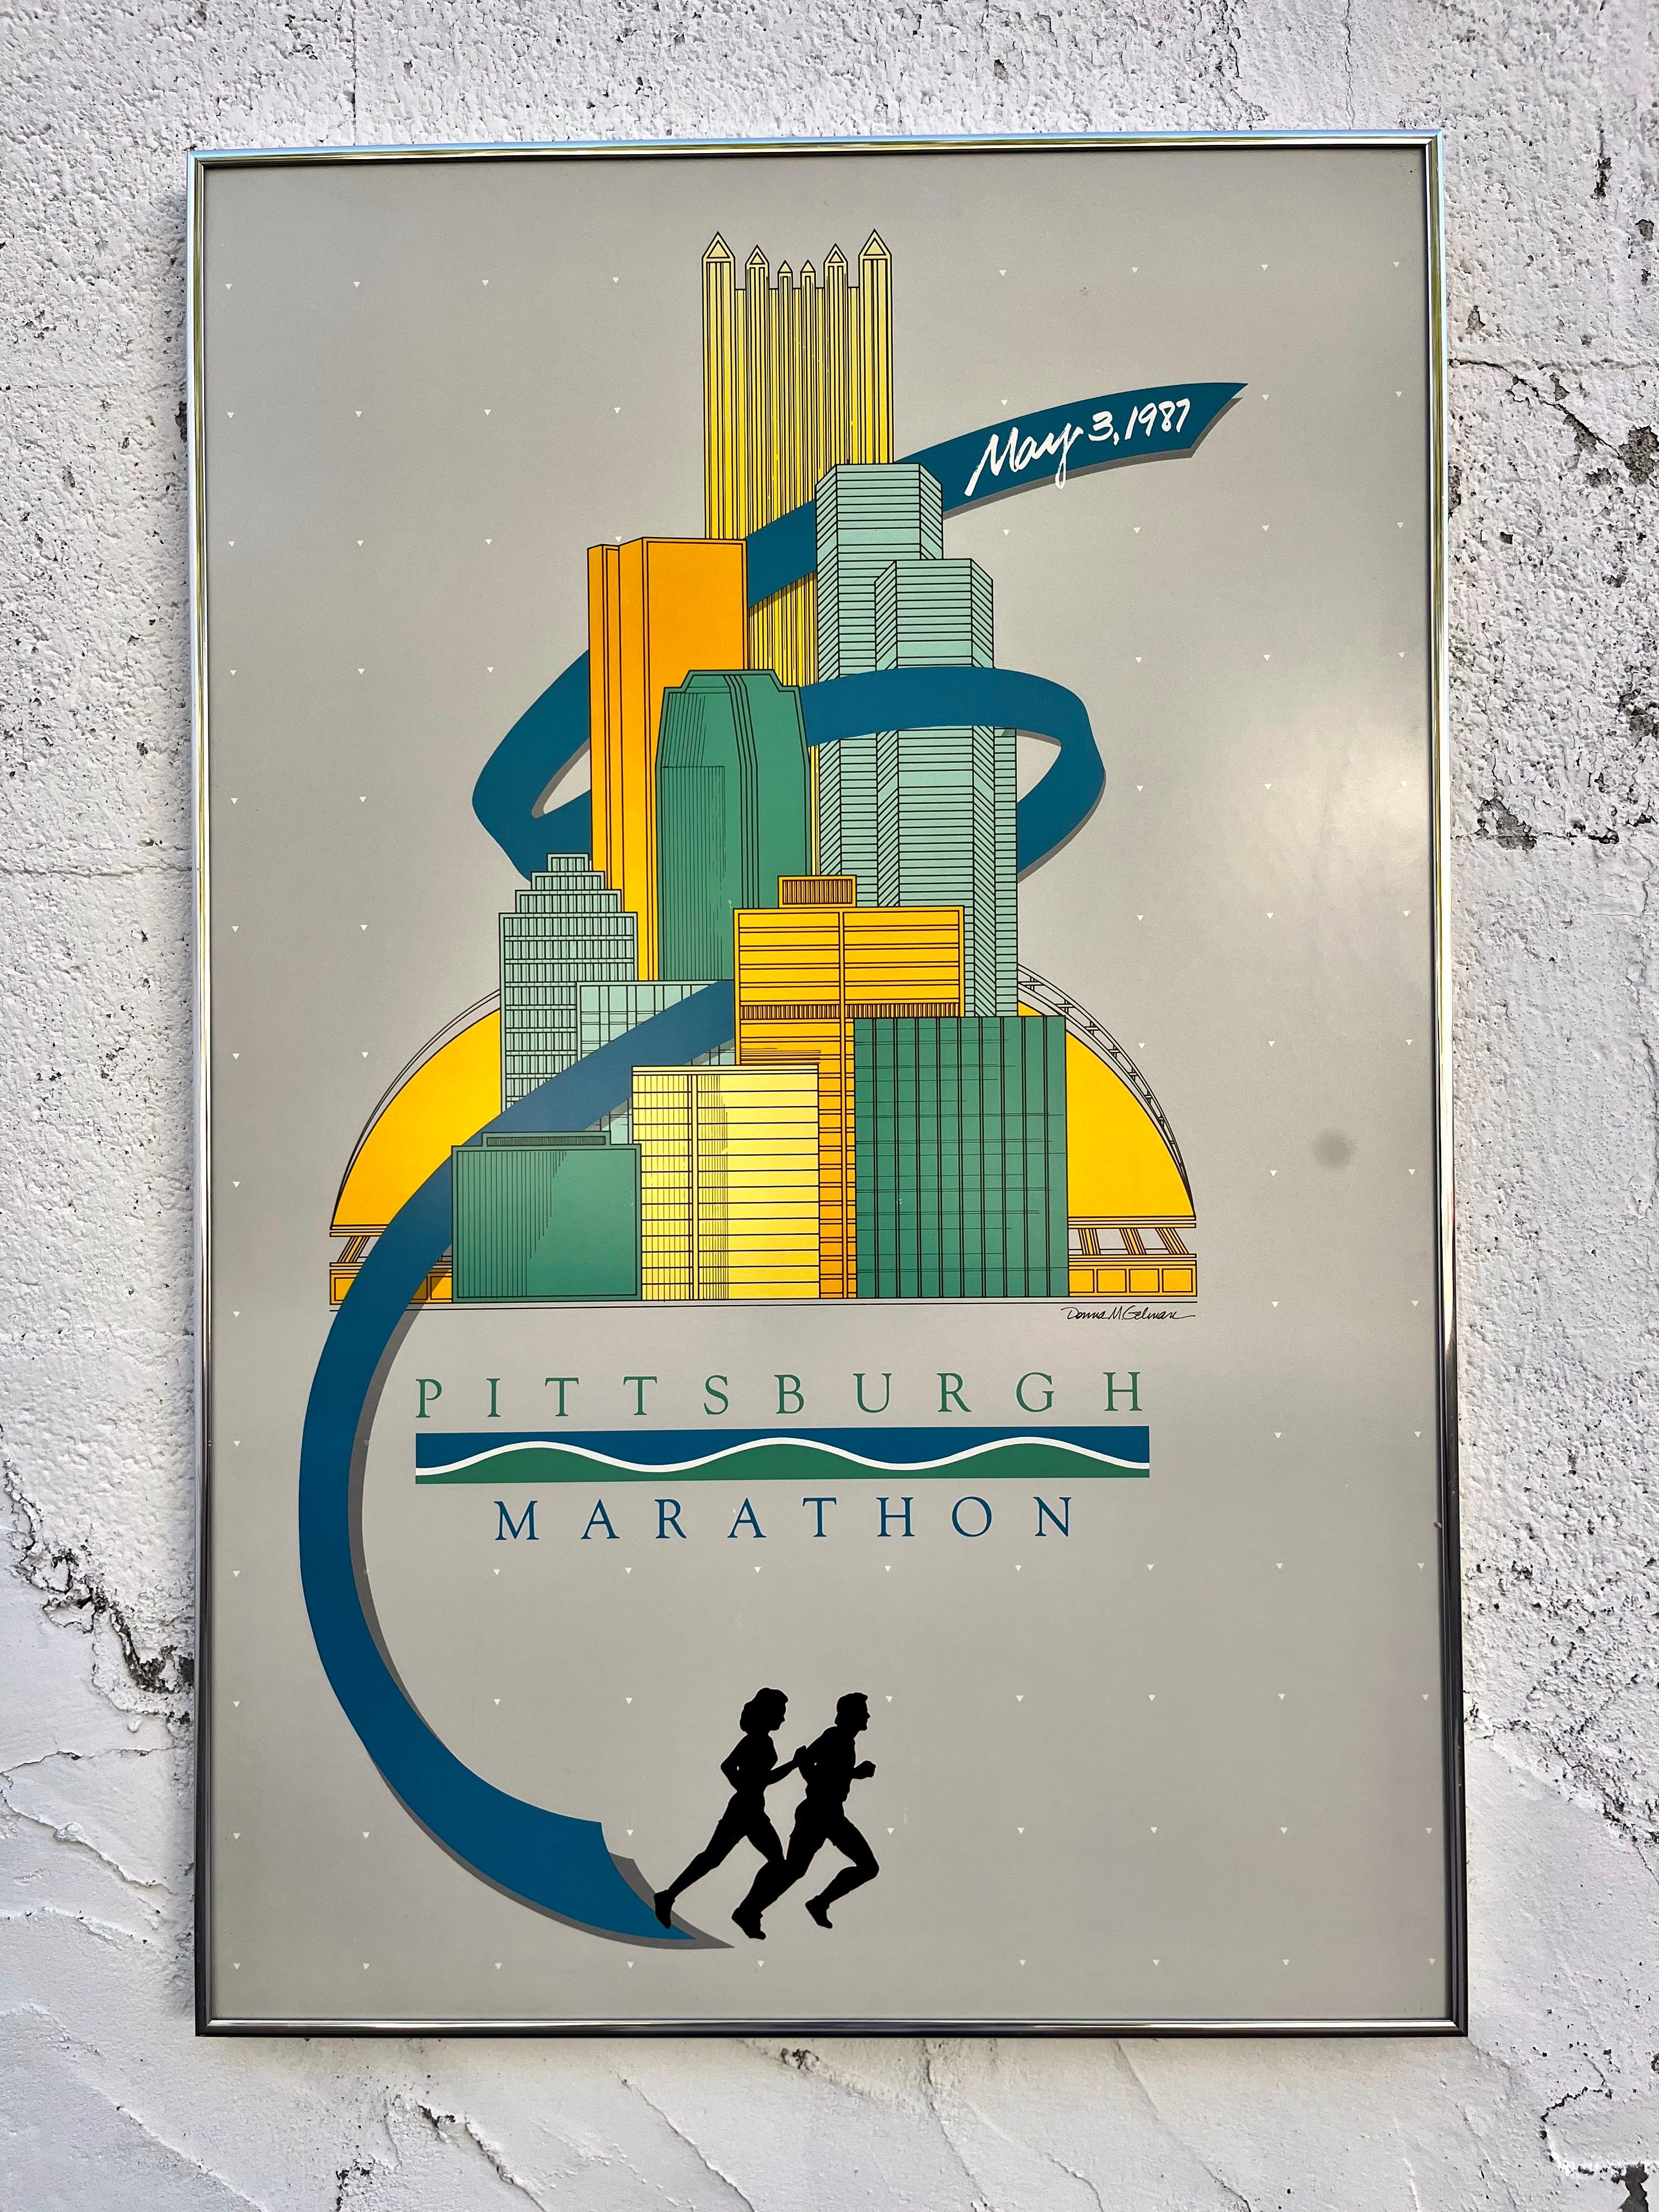 Original 1987 Pittsburgh Marathon Promotional Framed Poster by American Artist Donna M Gelman. 
Features a Modernist illustration of Pittsburgh Skyline over a mute gray background. 
Framed and Ready to hang. 
In Excellent Original Condition with